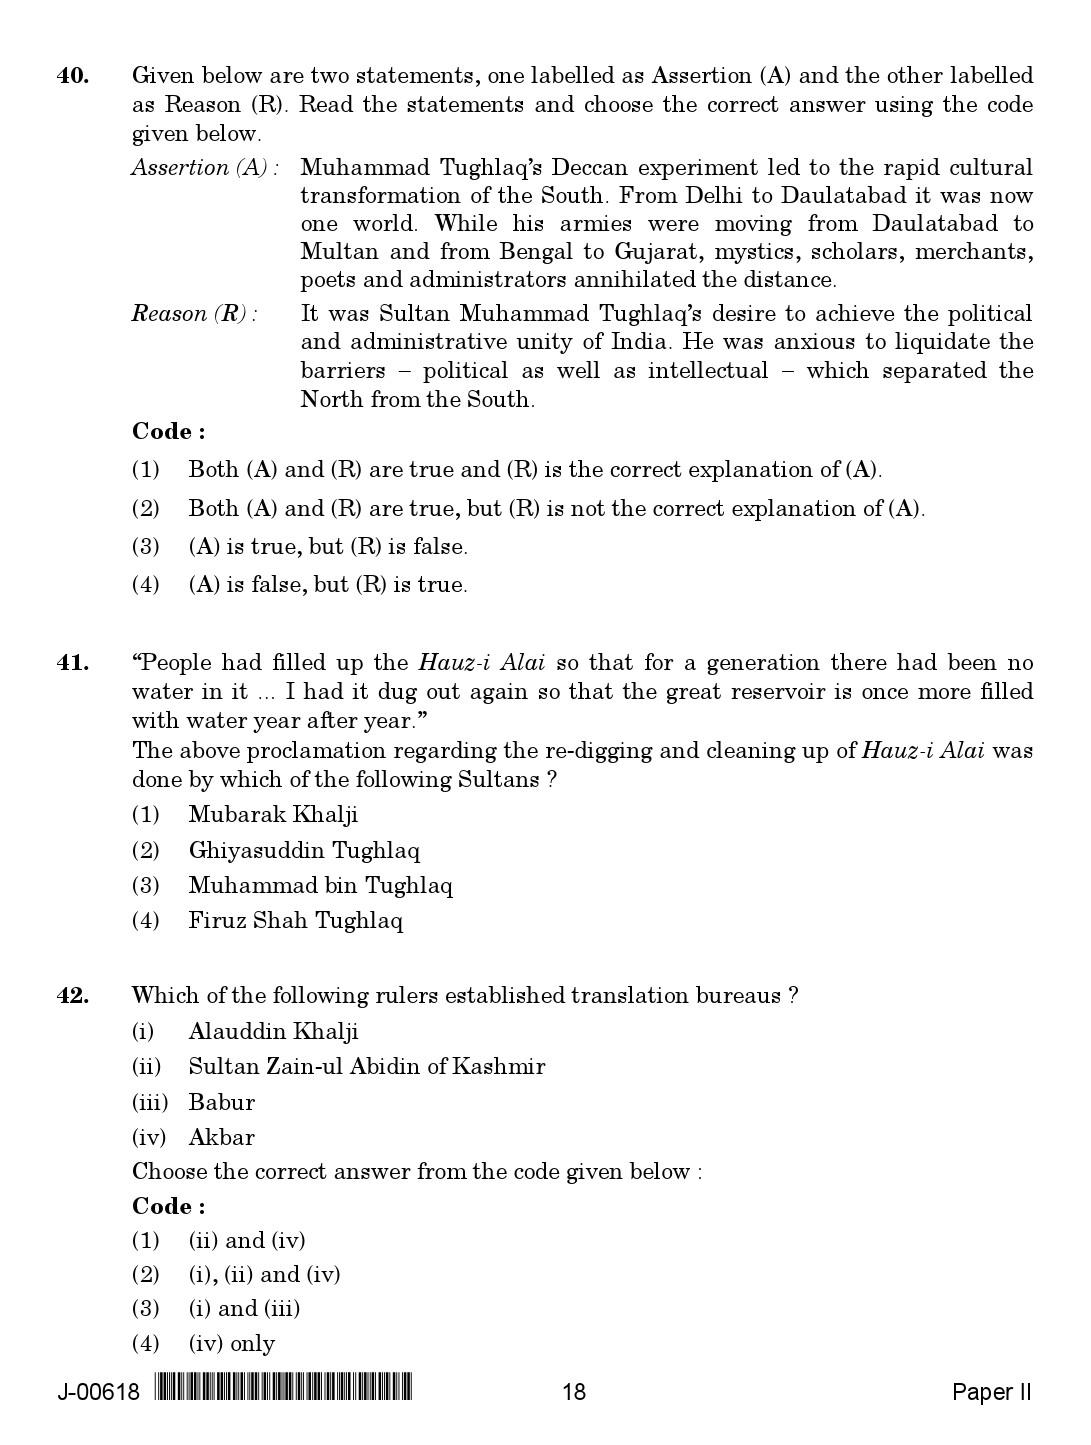 History Question Paper II July 2018 in English 2nd Exam 10